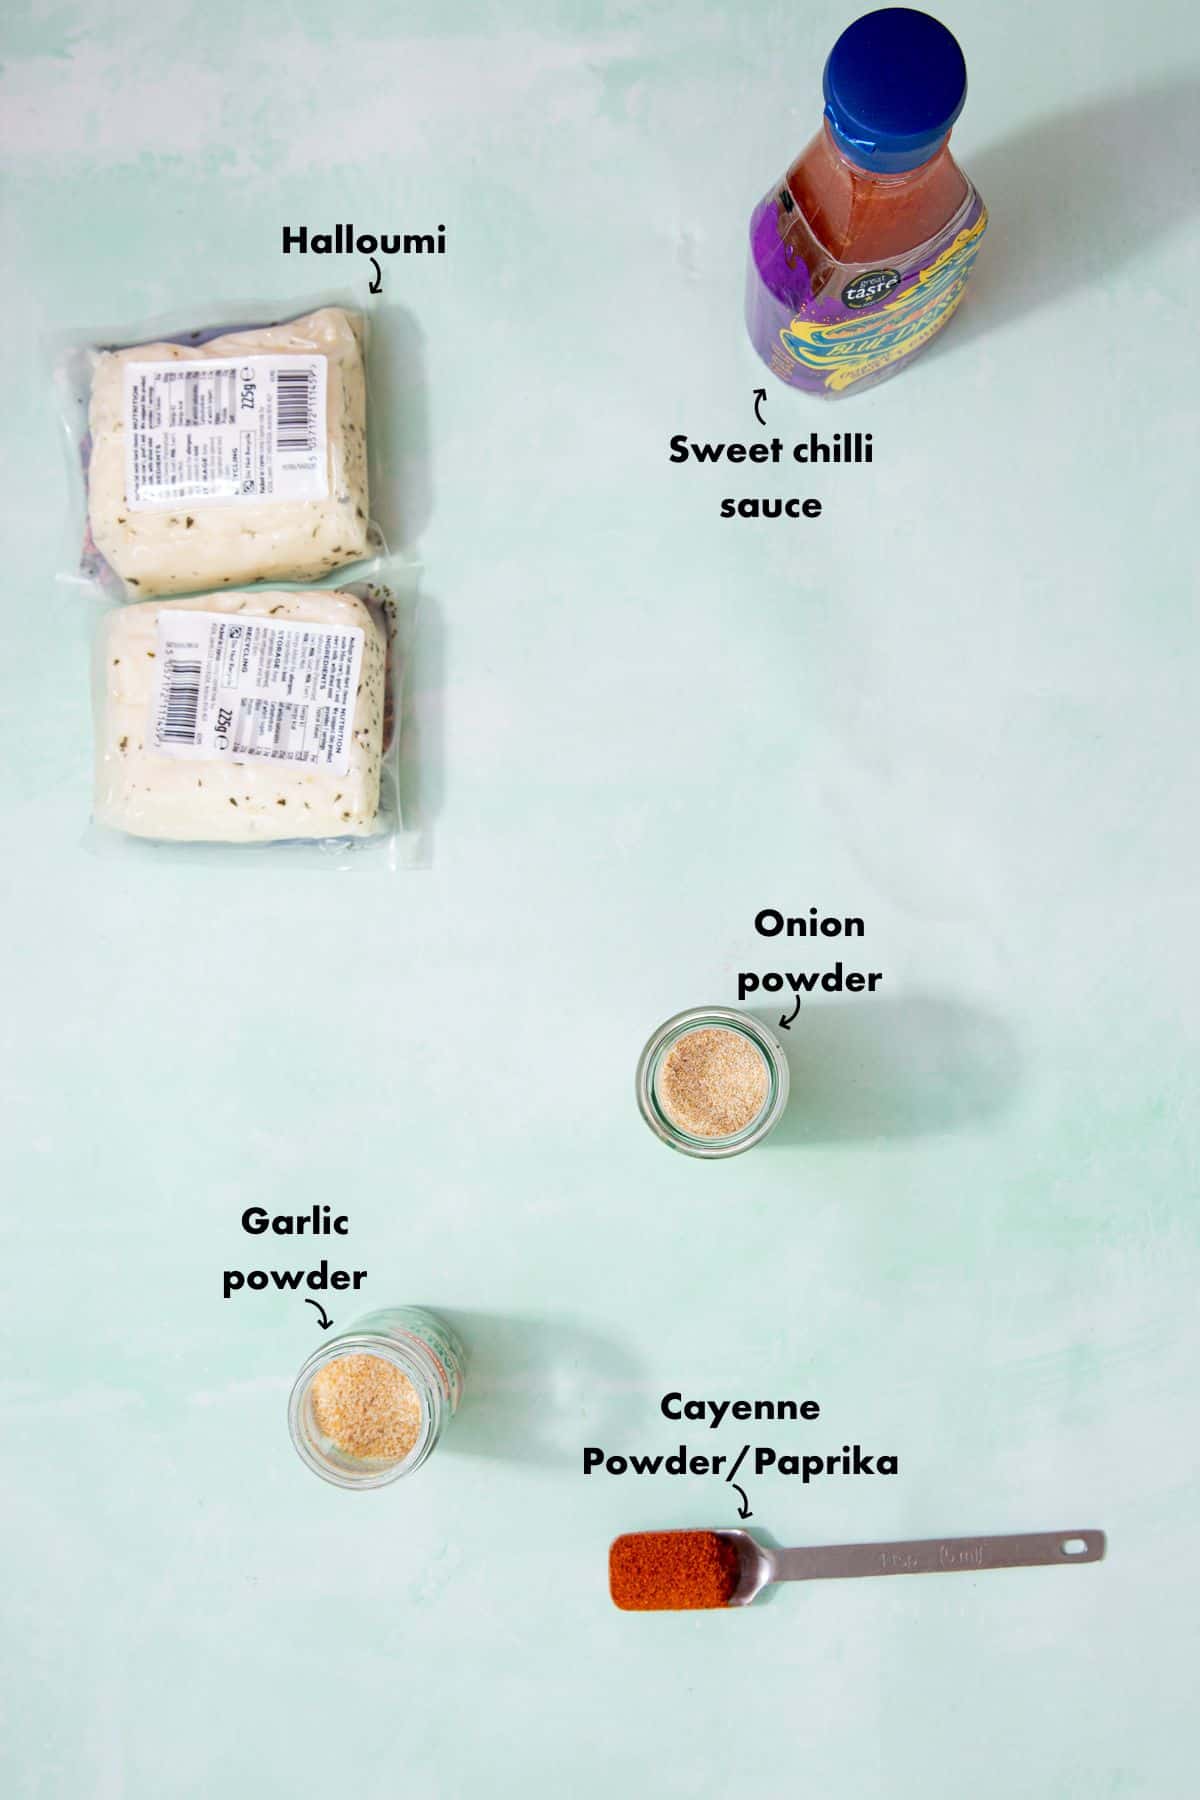 Ingredients to make the halloumi recipe laid out on a pale blue background and labelled.